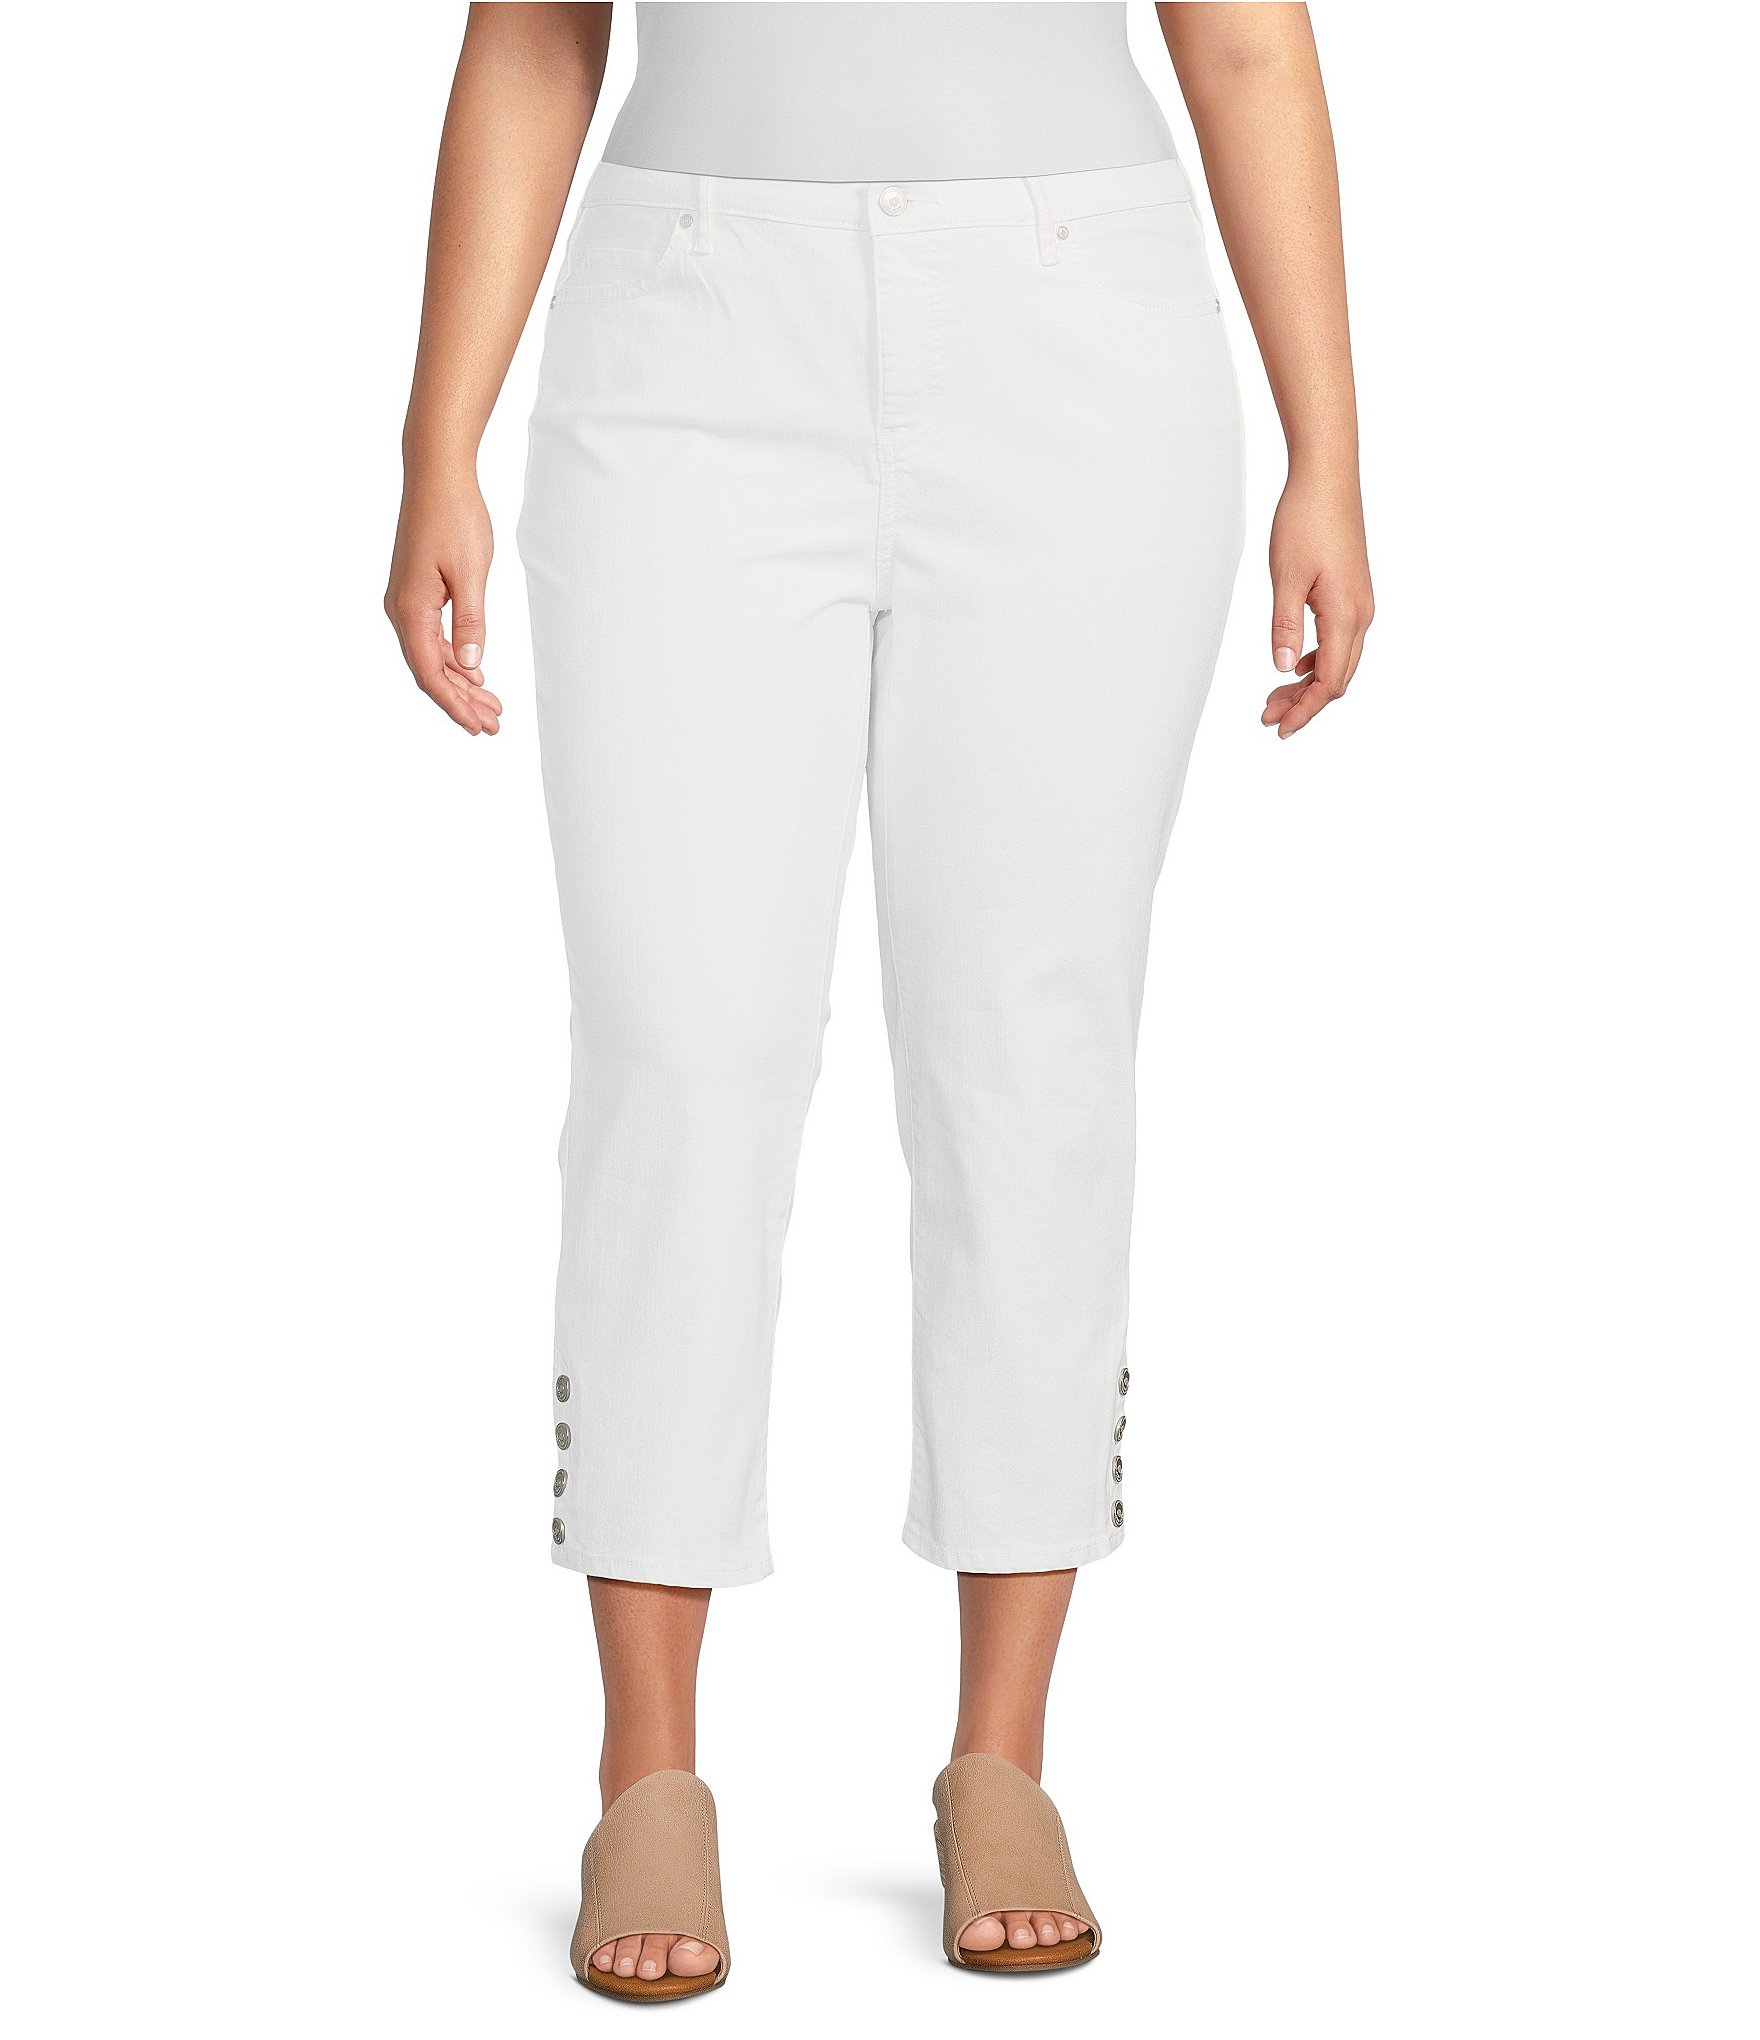 Plus-Size Mid-Rise Capri Jeggings. (6 Pack) • Faux front button closure •  Mid-rise • 5 Pockets • Faded color accents • Skinny capri leg • Super soft,  stretchy • Pull up styling